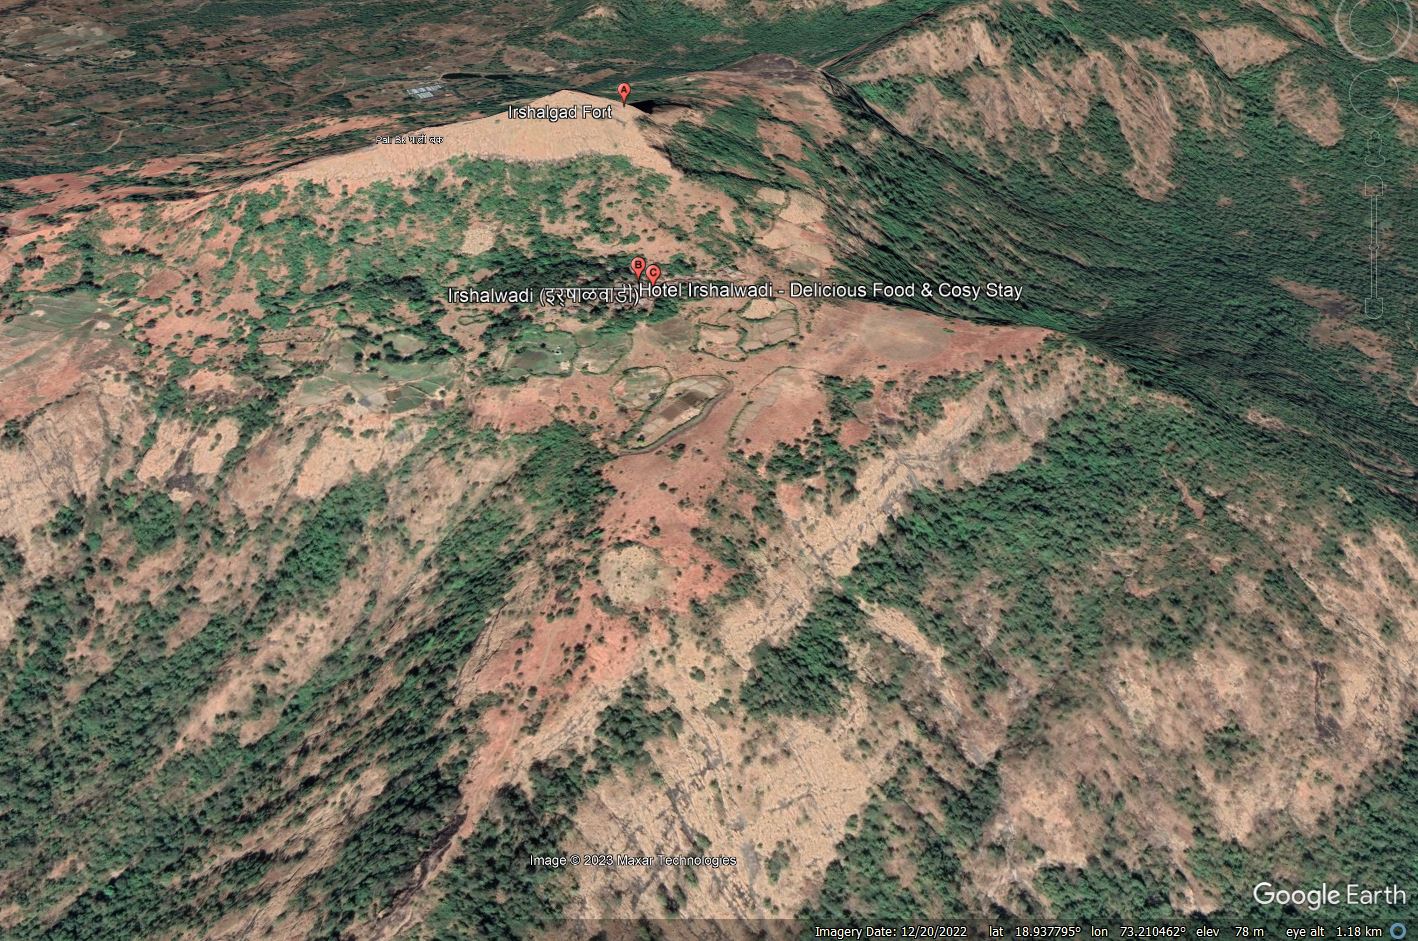 Google Earth image of Irshalwadi, the site of the 19 July 2023 landslide in India.